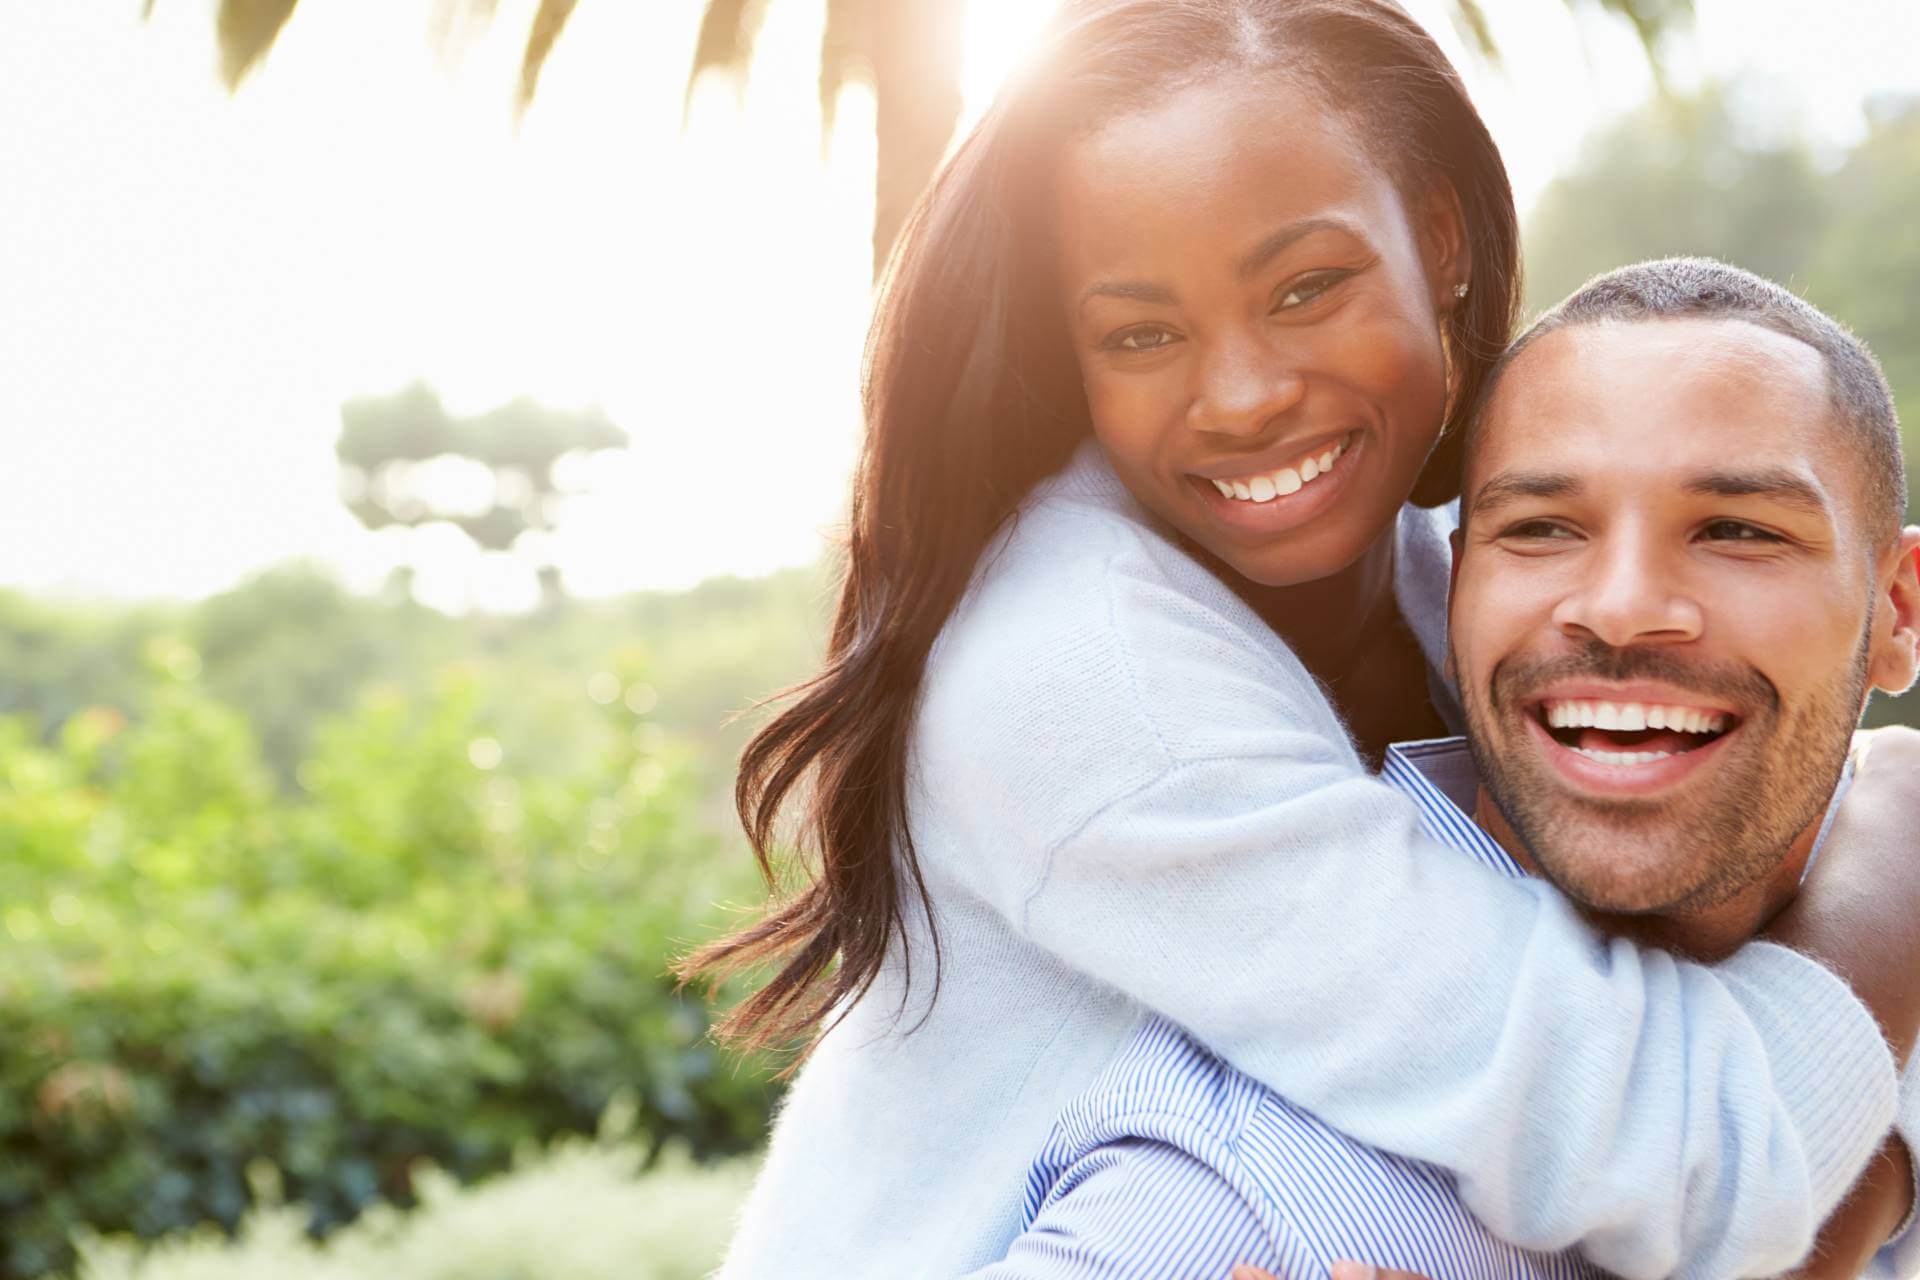 Have You Met Your Soulmate: How To Tell If She’s The One